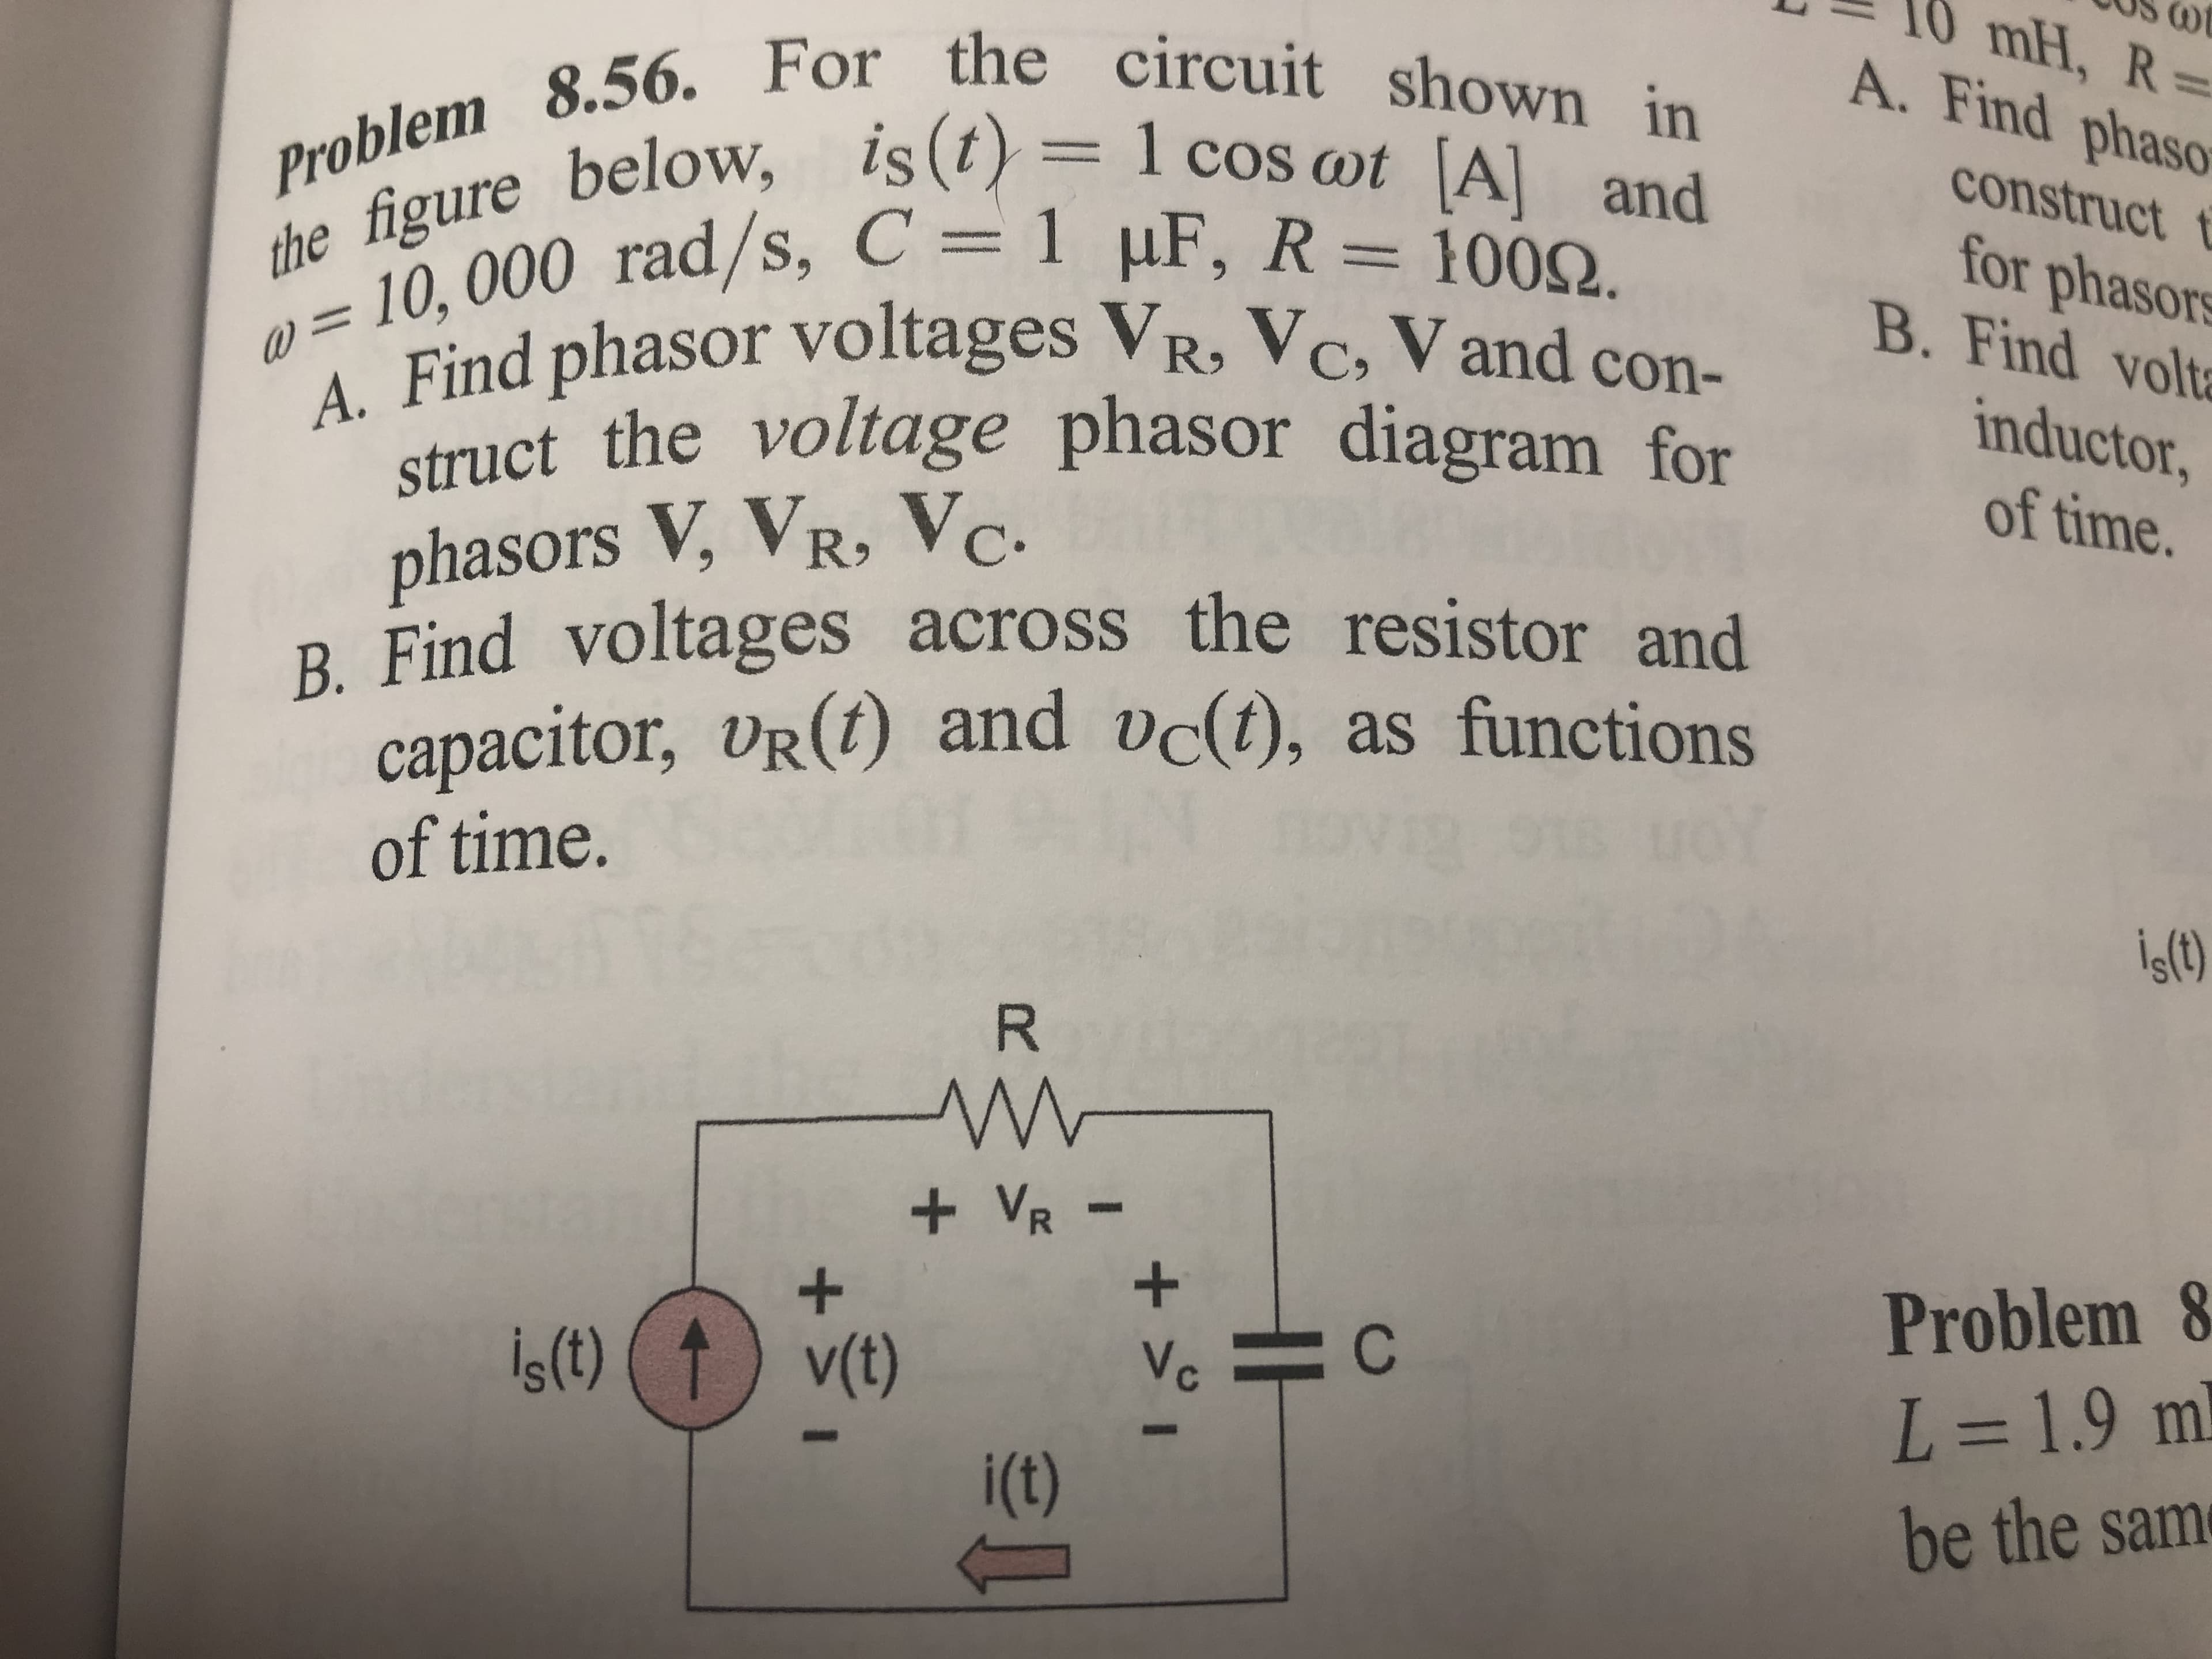 (0t
10 mH, R3D
A. Find phaso
the figure below, is(t) = 1 cos wt A] and
= 10,000 rad/s, C = 1 µF, R = 1002.
Find phasor voltages VR, Vc, V and con
Problem 8.56. For the circuit shown in
construct t
for phasors
B. Find volta
struct the voltage phasor diagram for
inductor,
of time.
phasors V, VR, Vc.
R. Find voltages across the resistor and
capacitor, vr(1) and vc(t), as functions
of time.
İş(t)
the
+ VR-
Problem &
İç(t) 1) v(t)
Vc
L%3D1.9 ml
i(t)
be the same
